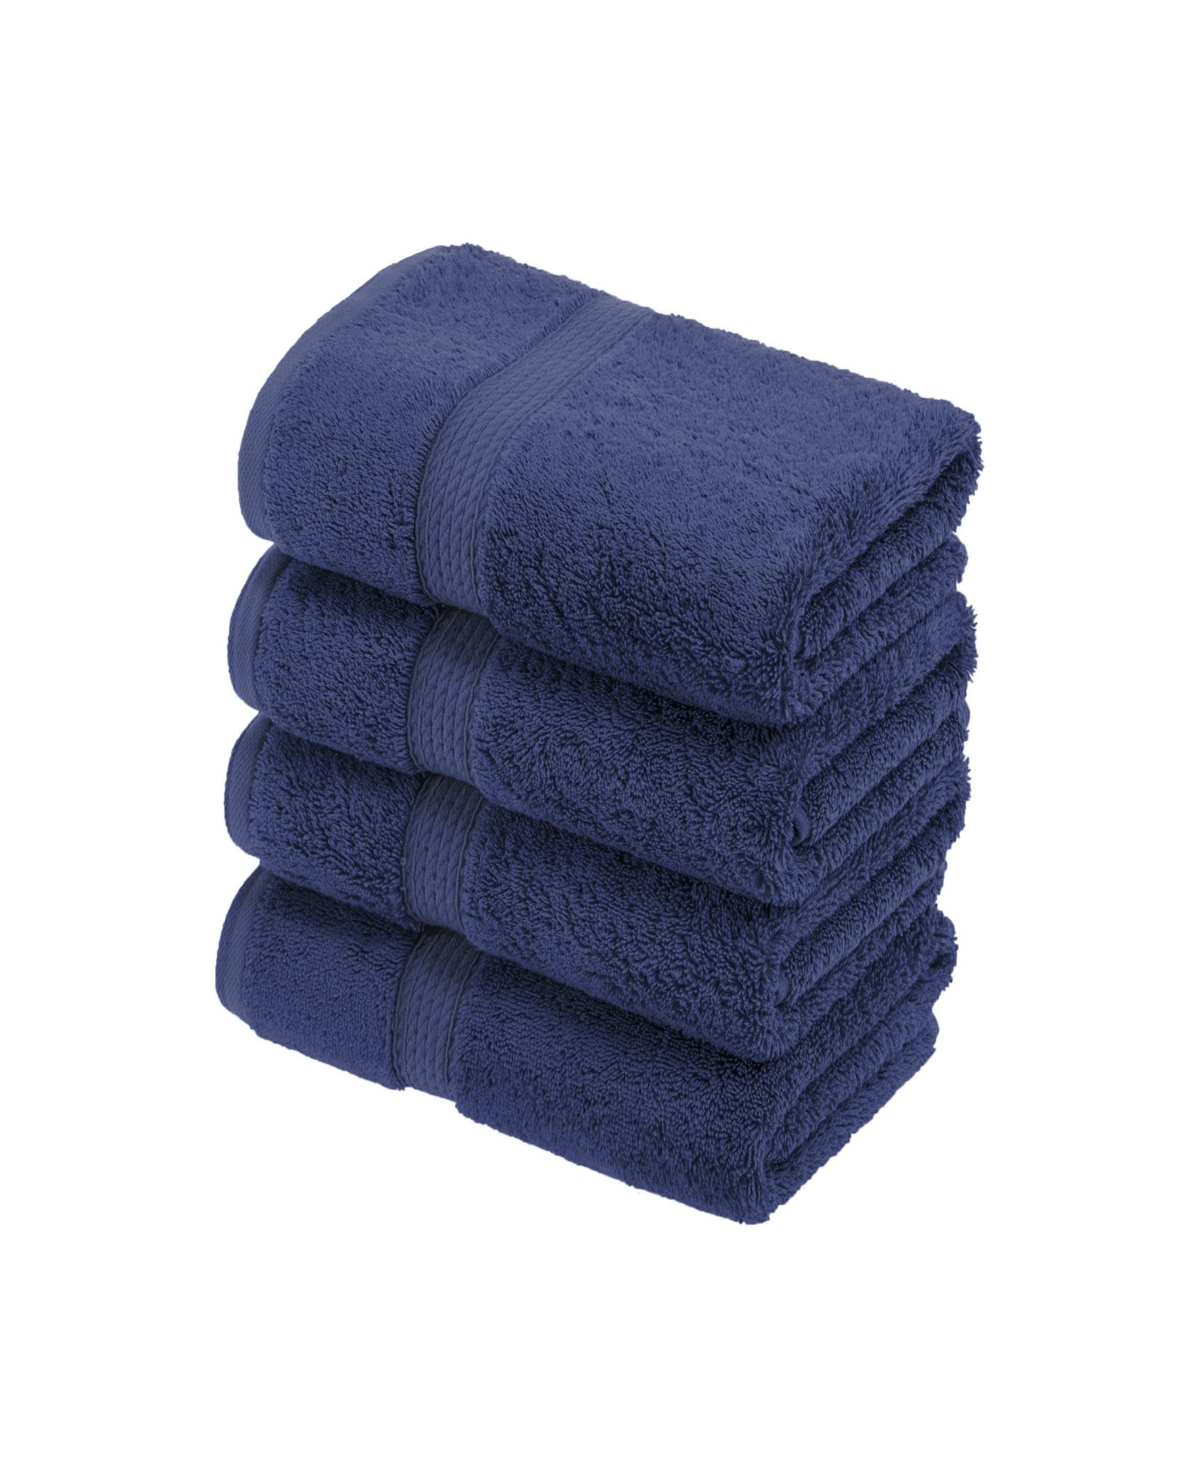 Superior Highly Absorbent 4 Piece Egyptian Cotton Ultra Plush Solid Hand Towel Set Bedding In Navy Blue